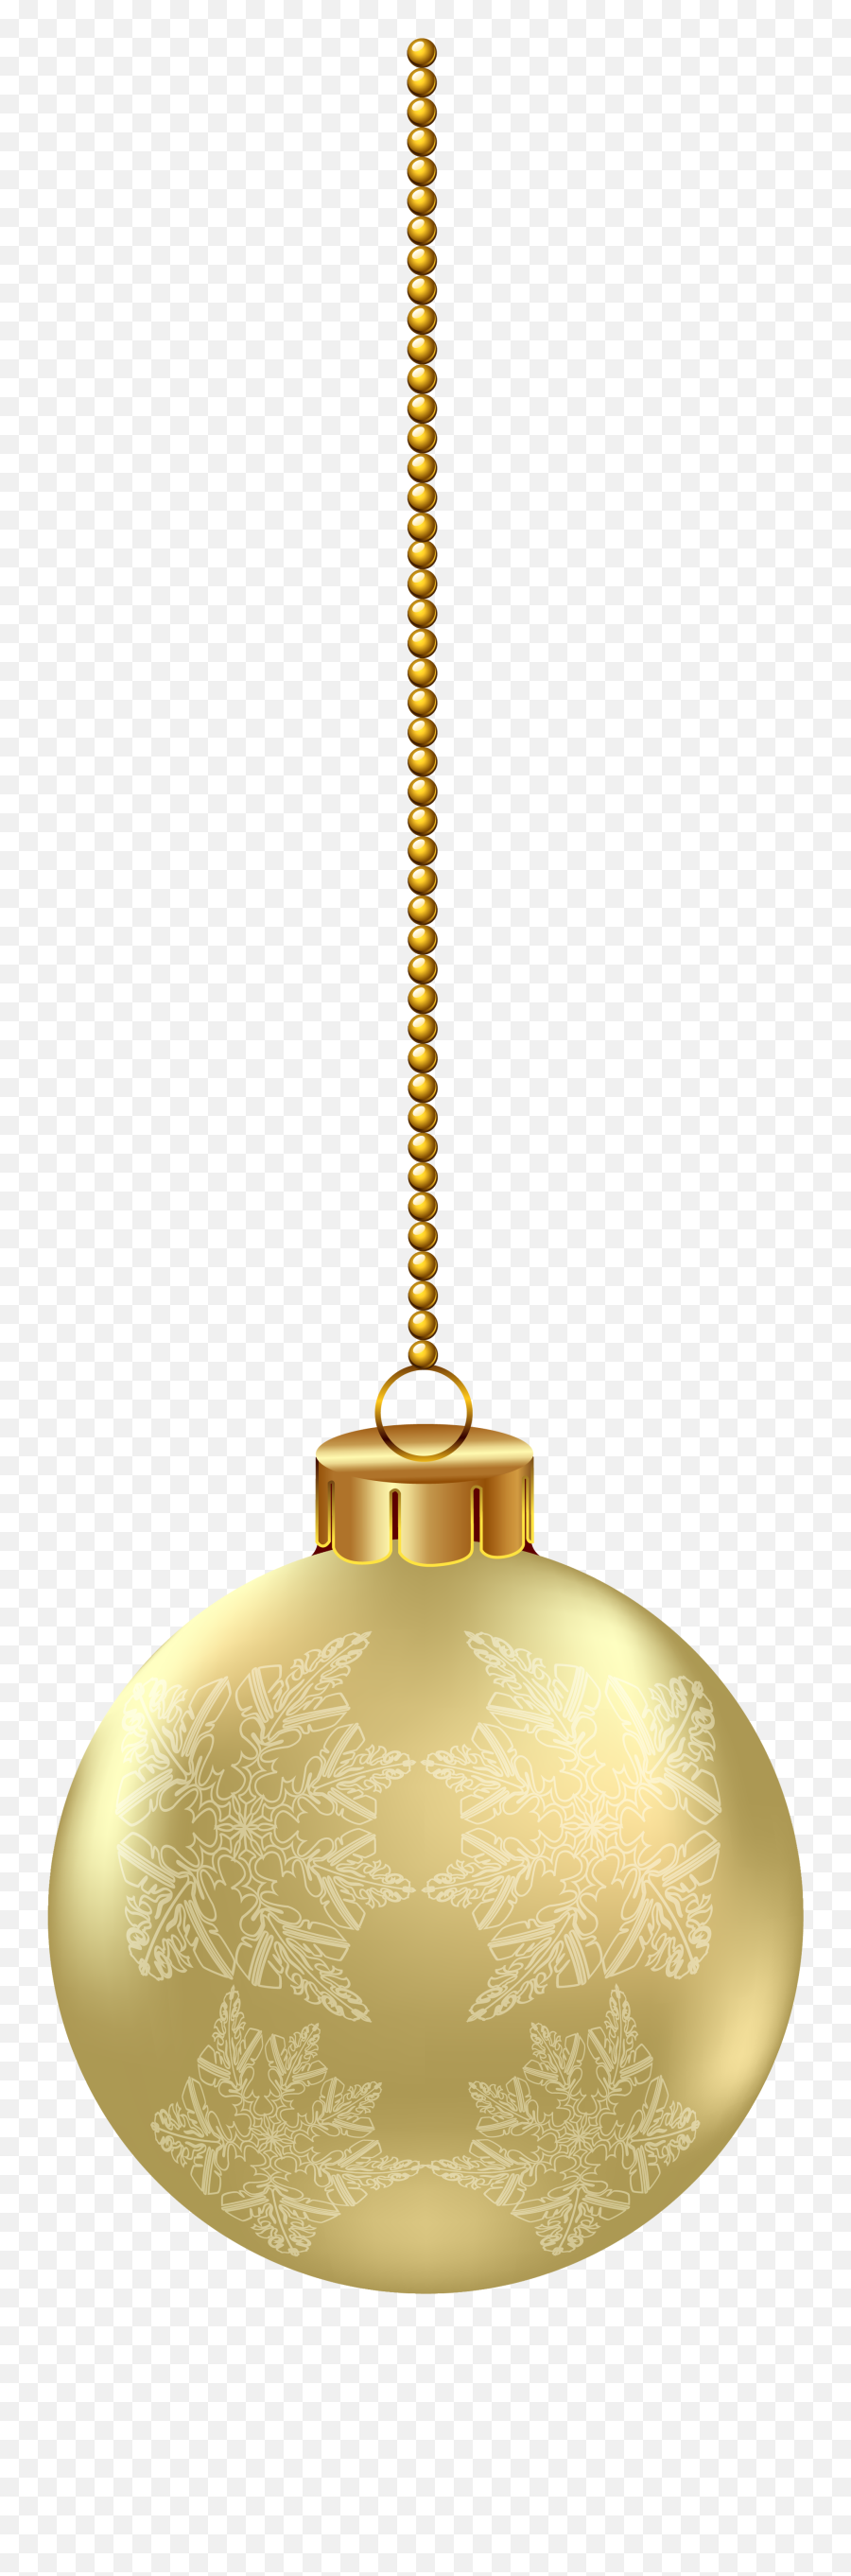 Download Hanging Christmas Ornament Png Clipart Image Is - Hanging Christmas Ornament Transparent Emoji,Christmas Ornament Png